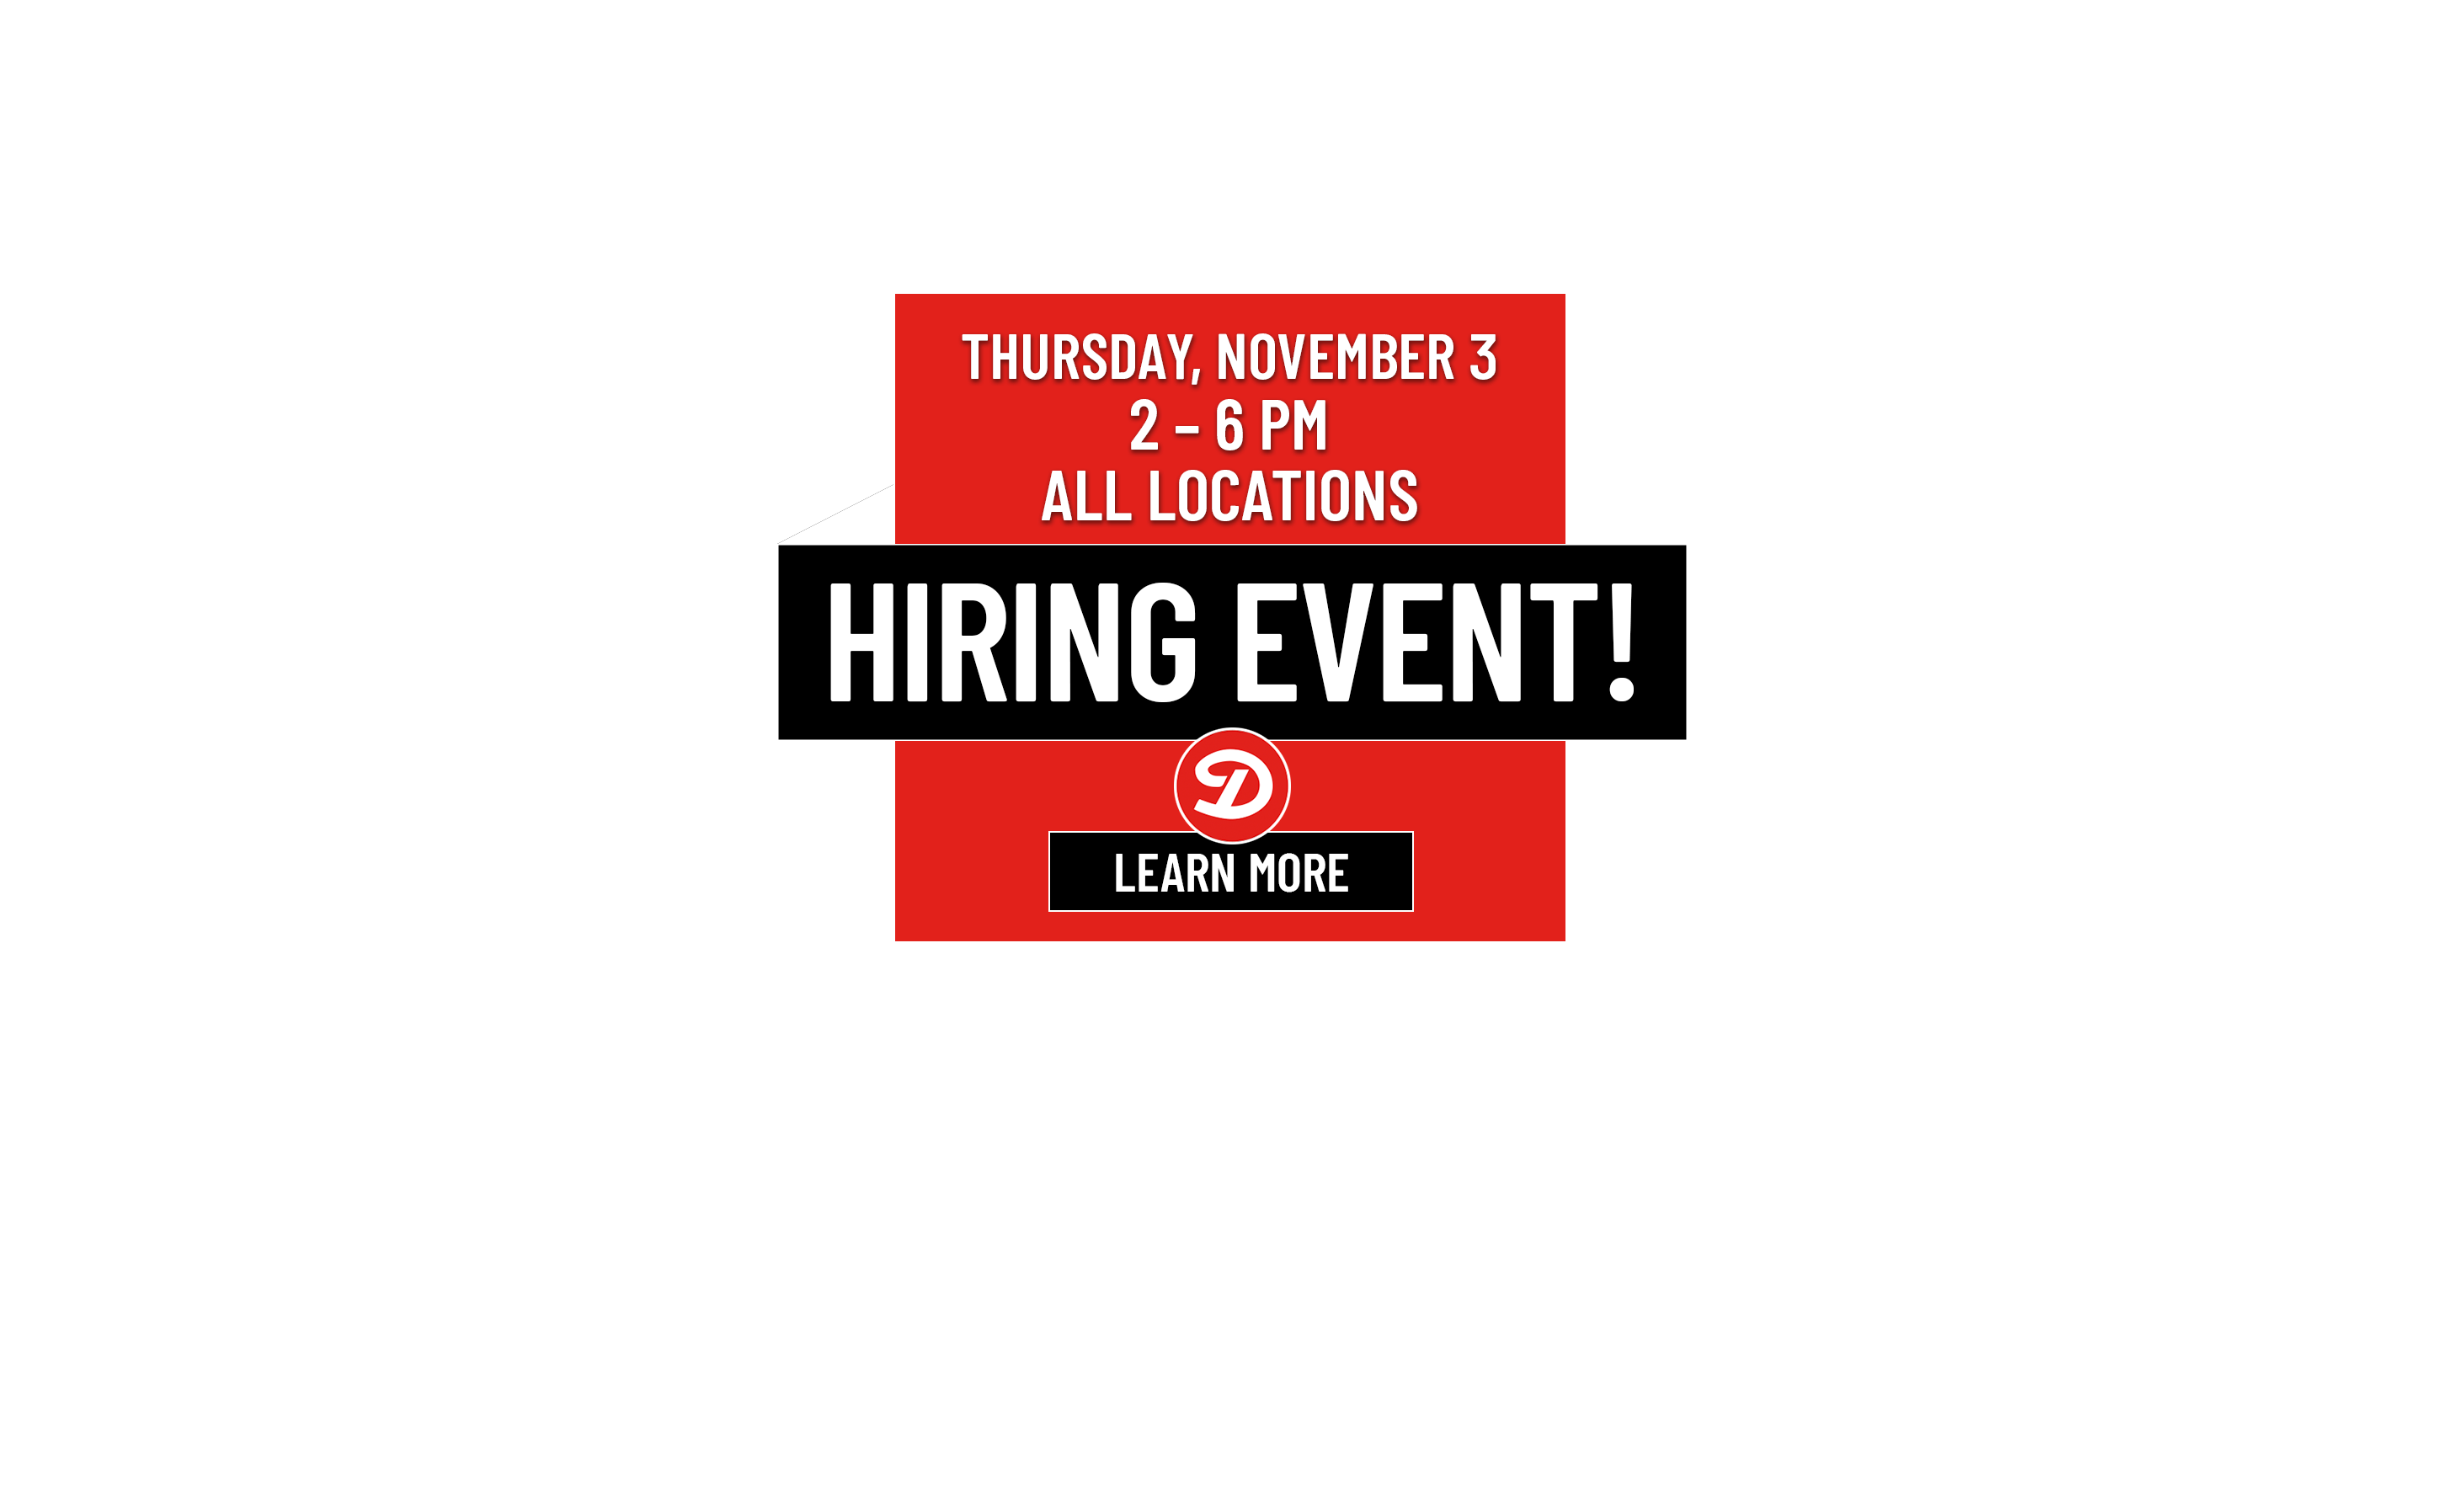 Wednesday, September 21, 2pm - 6pm: All Locations Hiring Event! Learn More